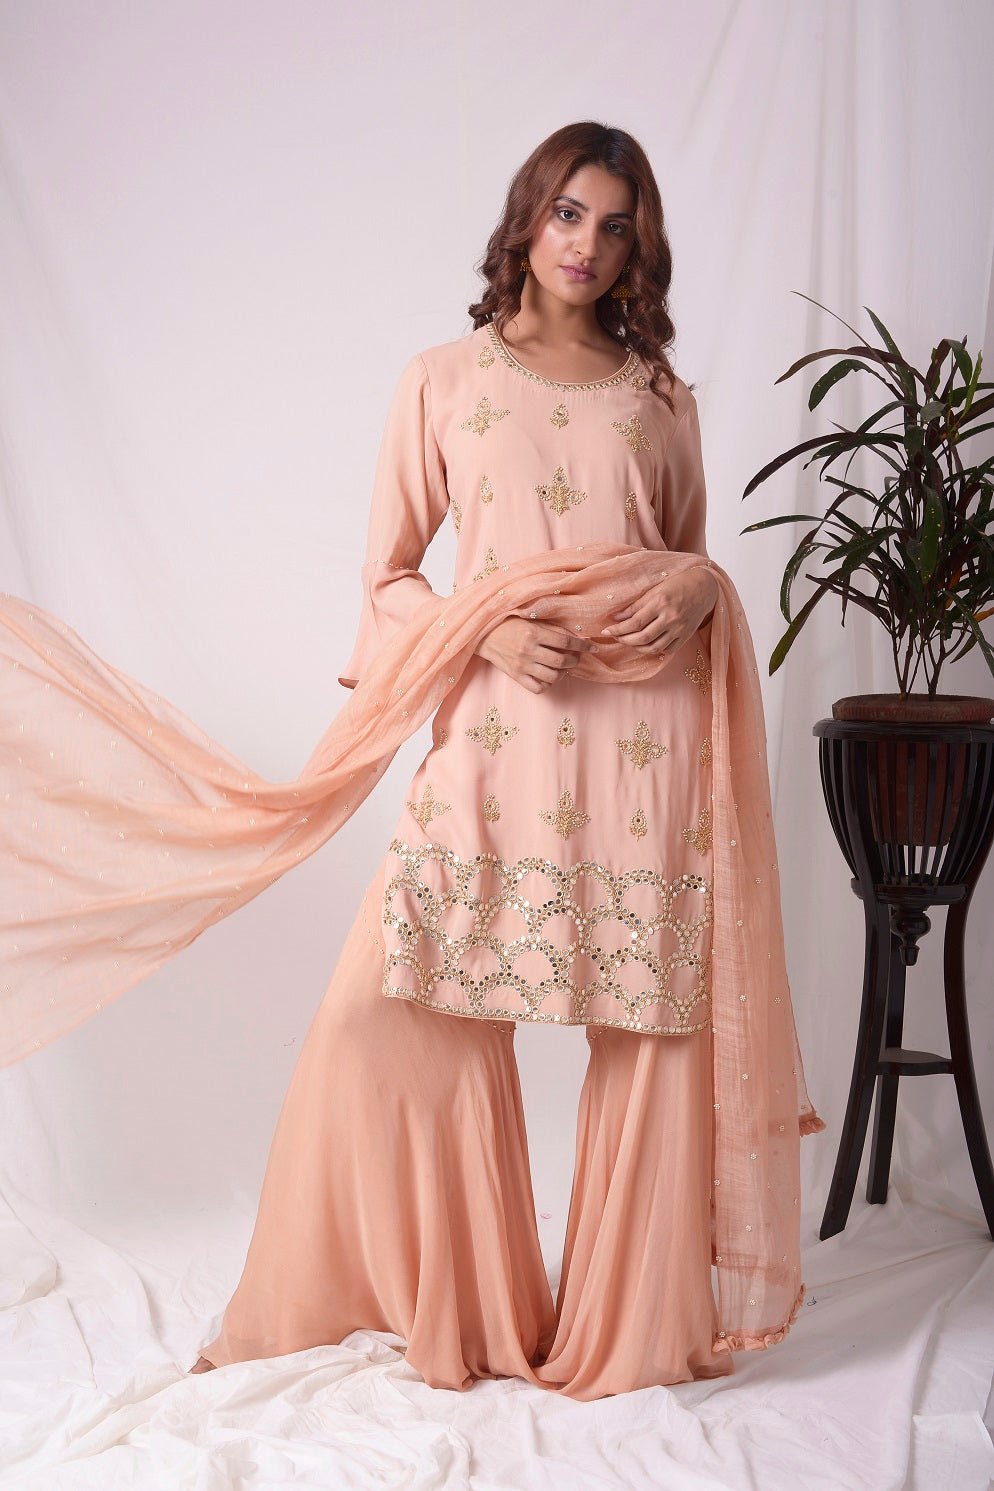 Buy peach orange georgette suit online in USA. Suit has fine gold design work. Kurta has 3/4 length sleeves, orange palazzo, duppatta with gold design. Simple look makes it elegant. Be the talk of parties and weddings with exquisite designer gowns from Pure Elegance Indian clothing store in USA. Shop online now.-full view-3